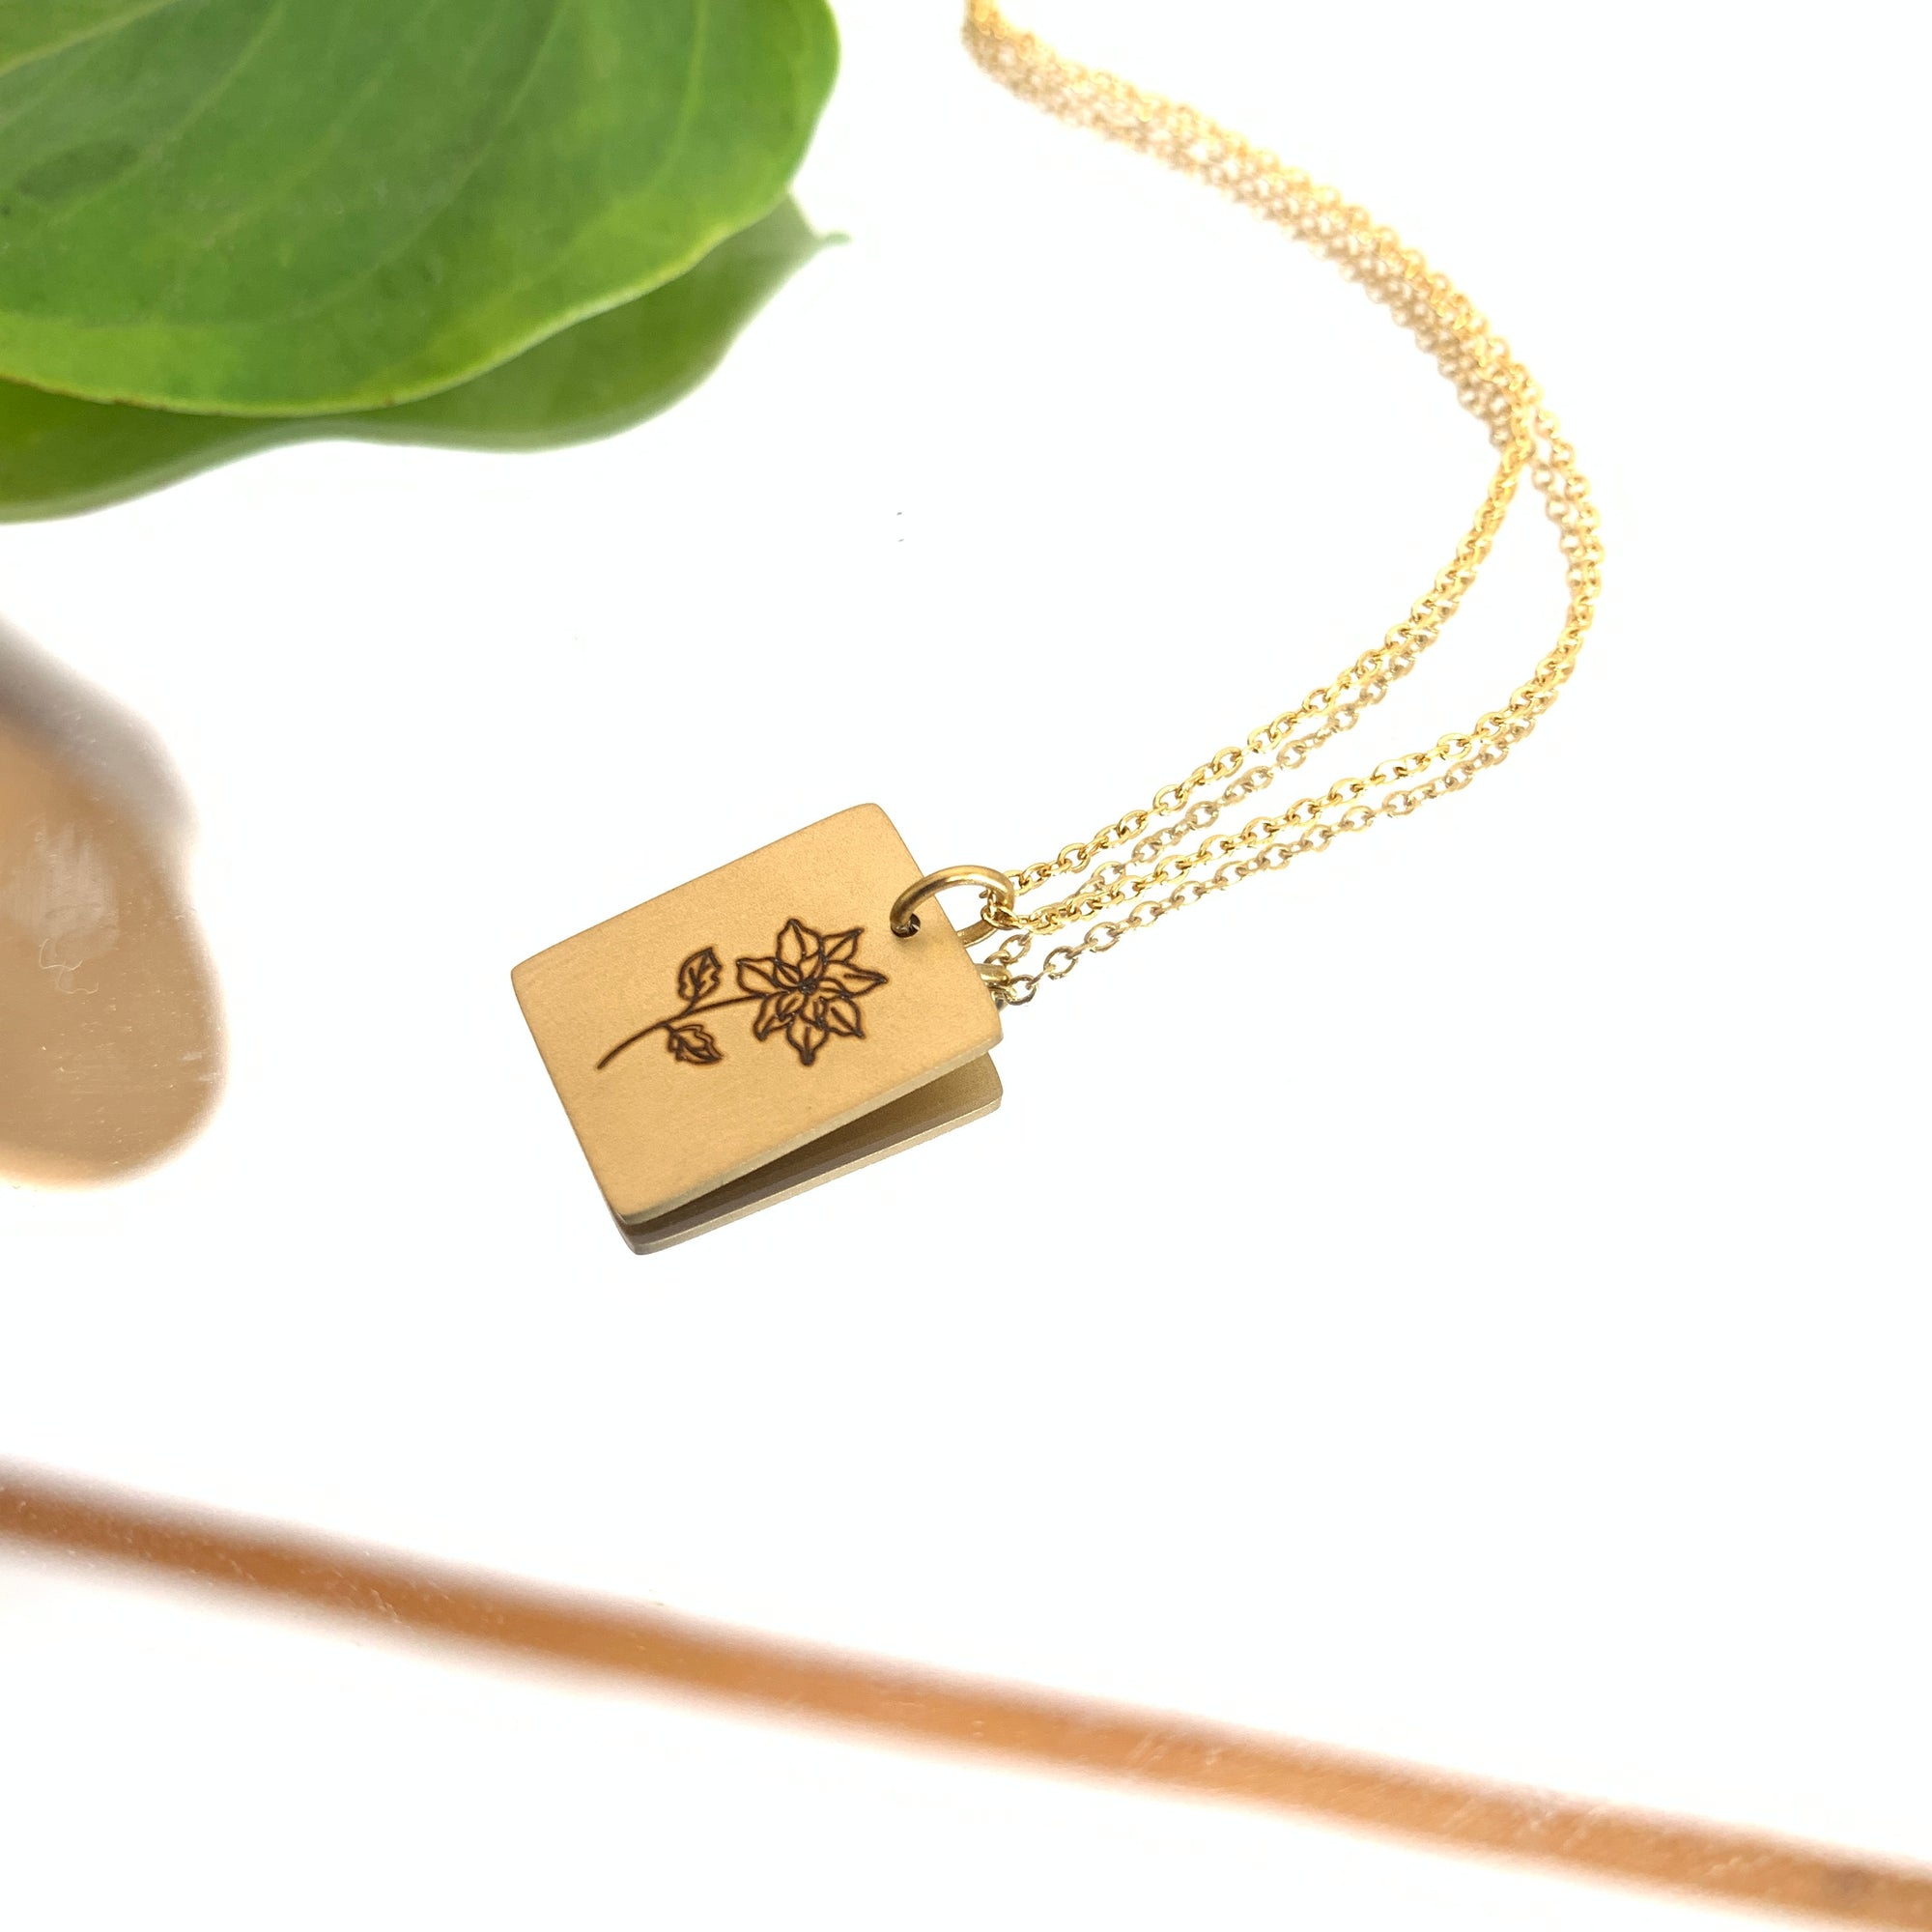 Customized oval tag necklace, engraved birth flower necklace